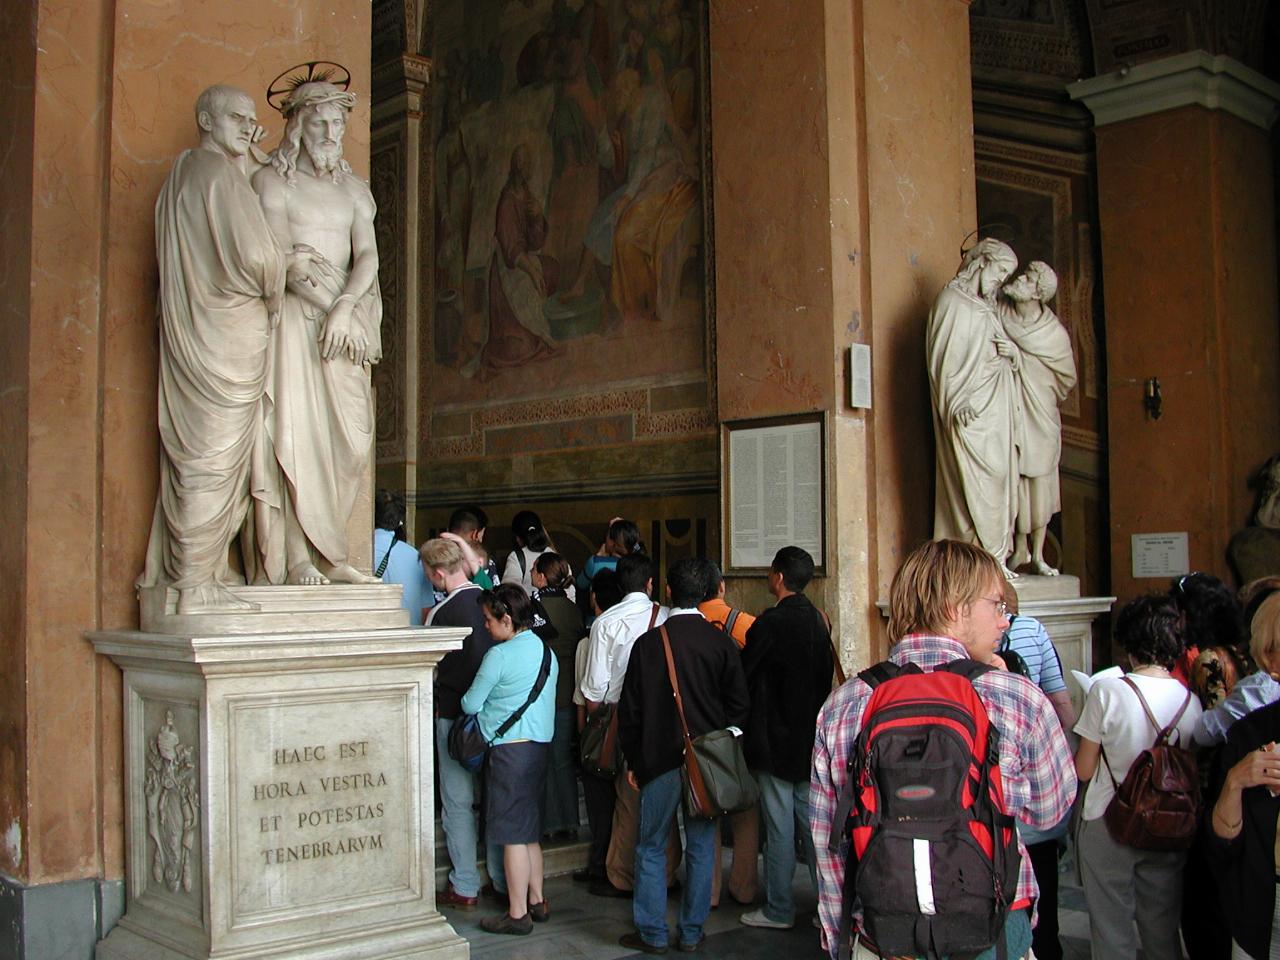 Group queueing to ascend Sacred Steps - thought to be from Pontius Pilate's house in Jerusalem?